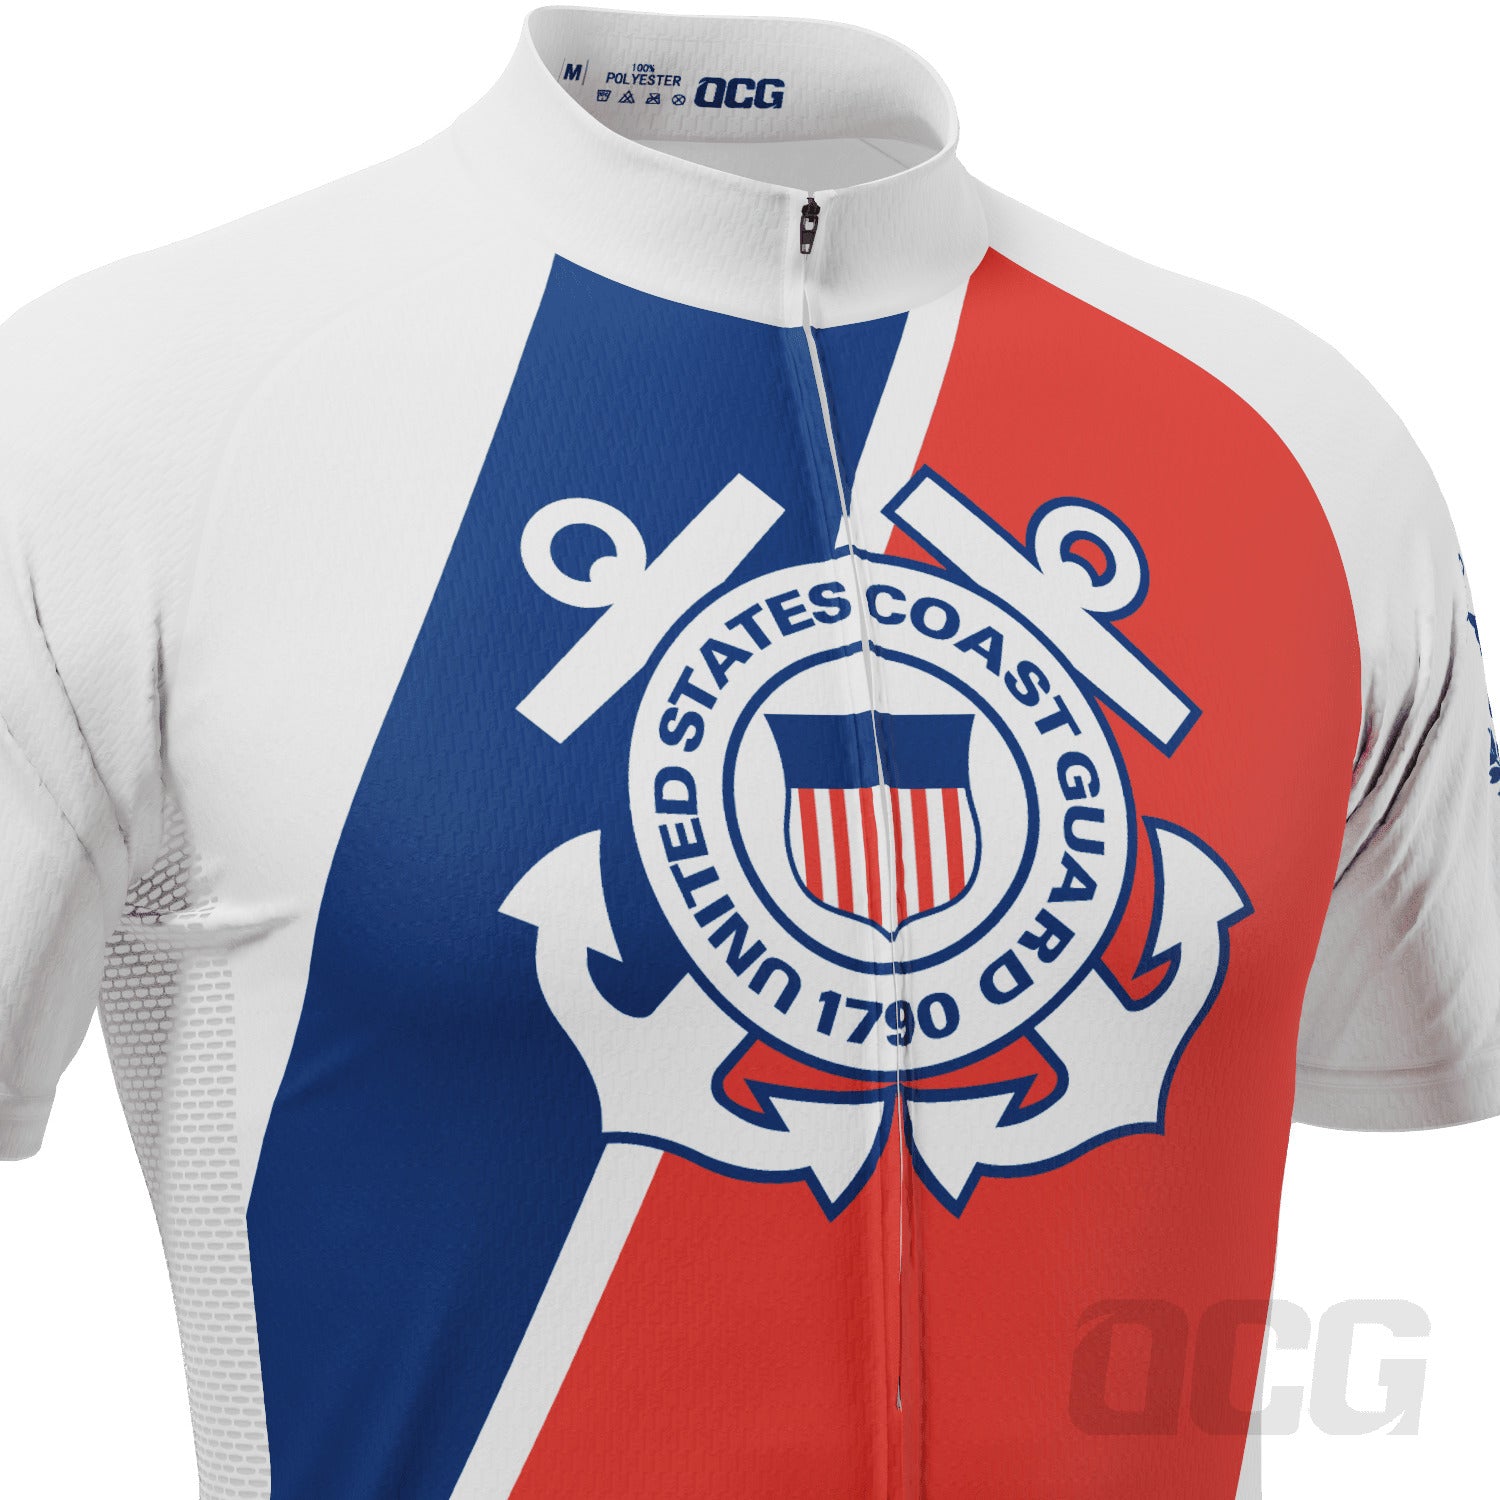 Men's USAF United States Coast Guard Short Sleeve Cycling Jersey